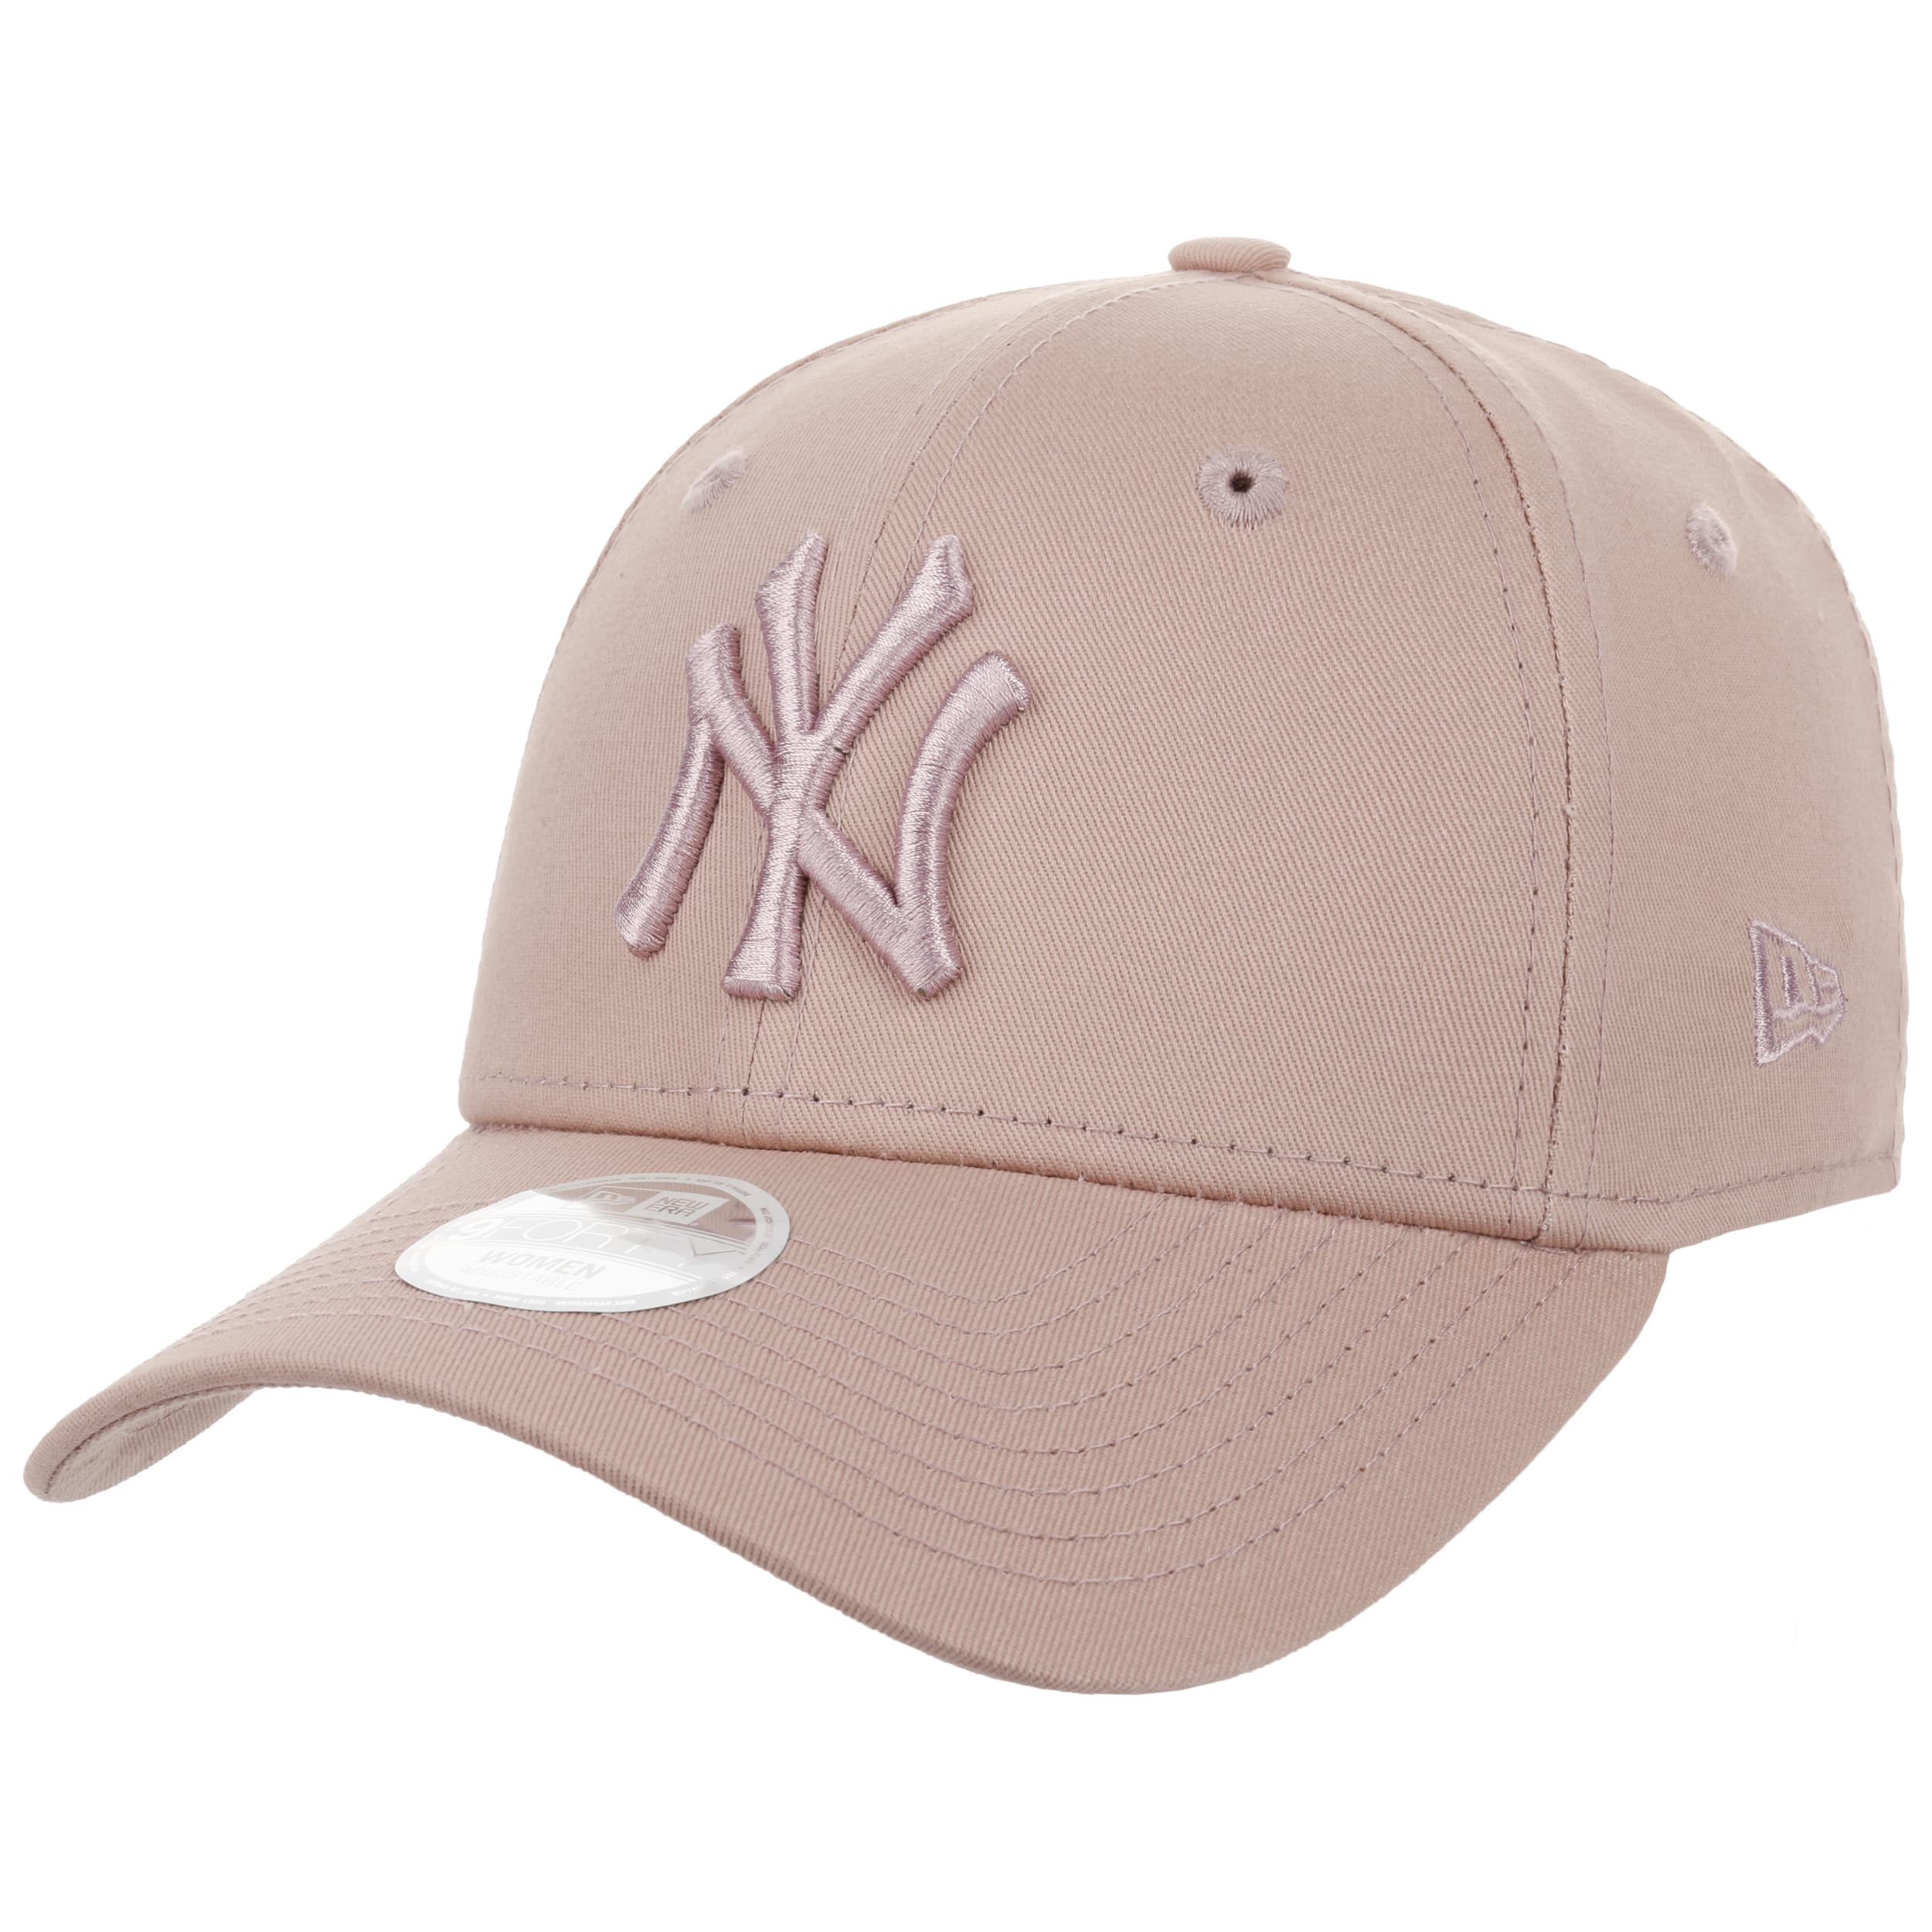 New York Yankees Essential All White 9FORTY Cap